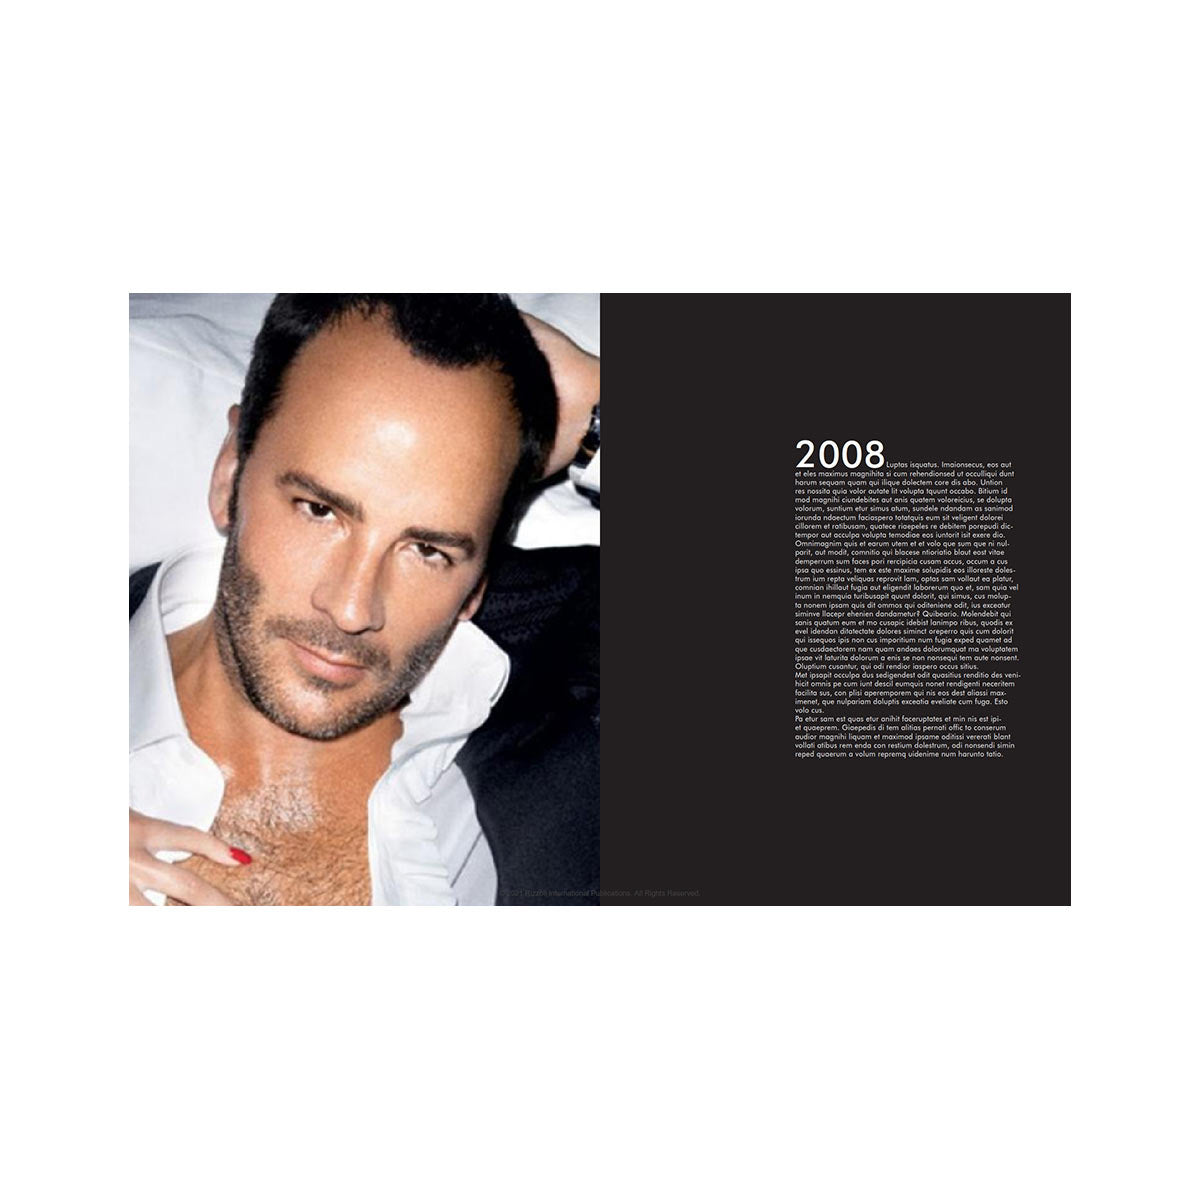 TOM FORD 002 Book